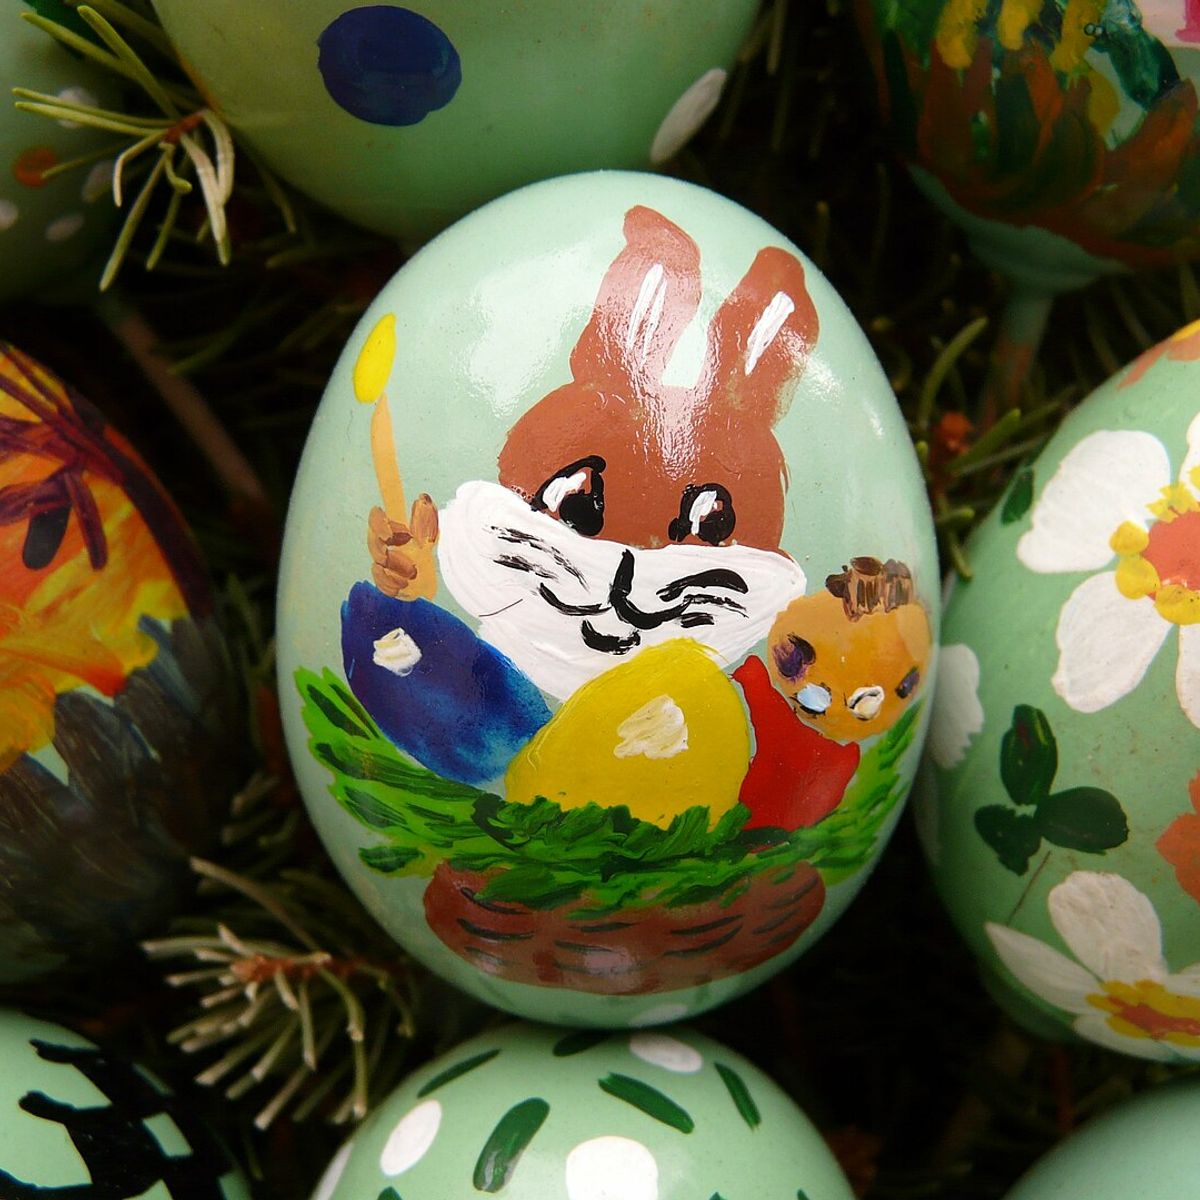 The Myth and History Behind the Easter Bunny and Its Eggs